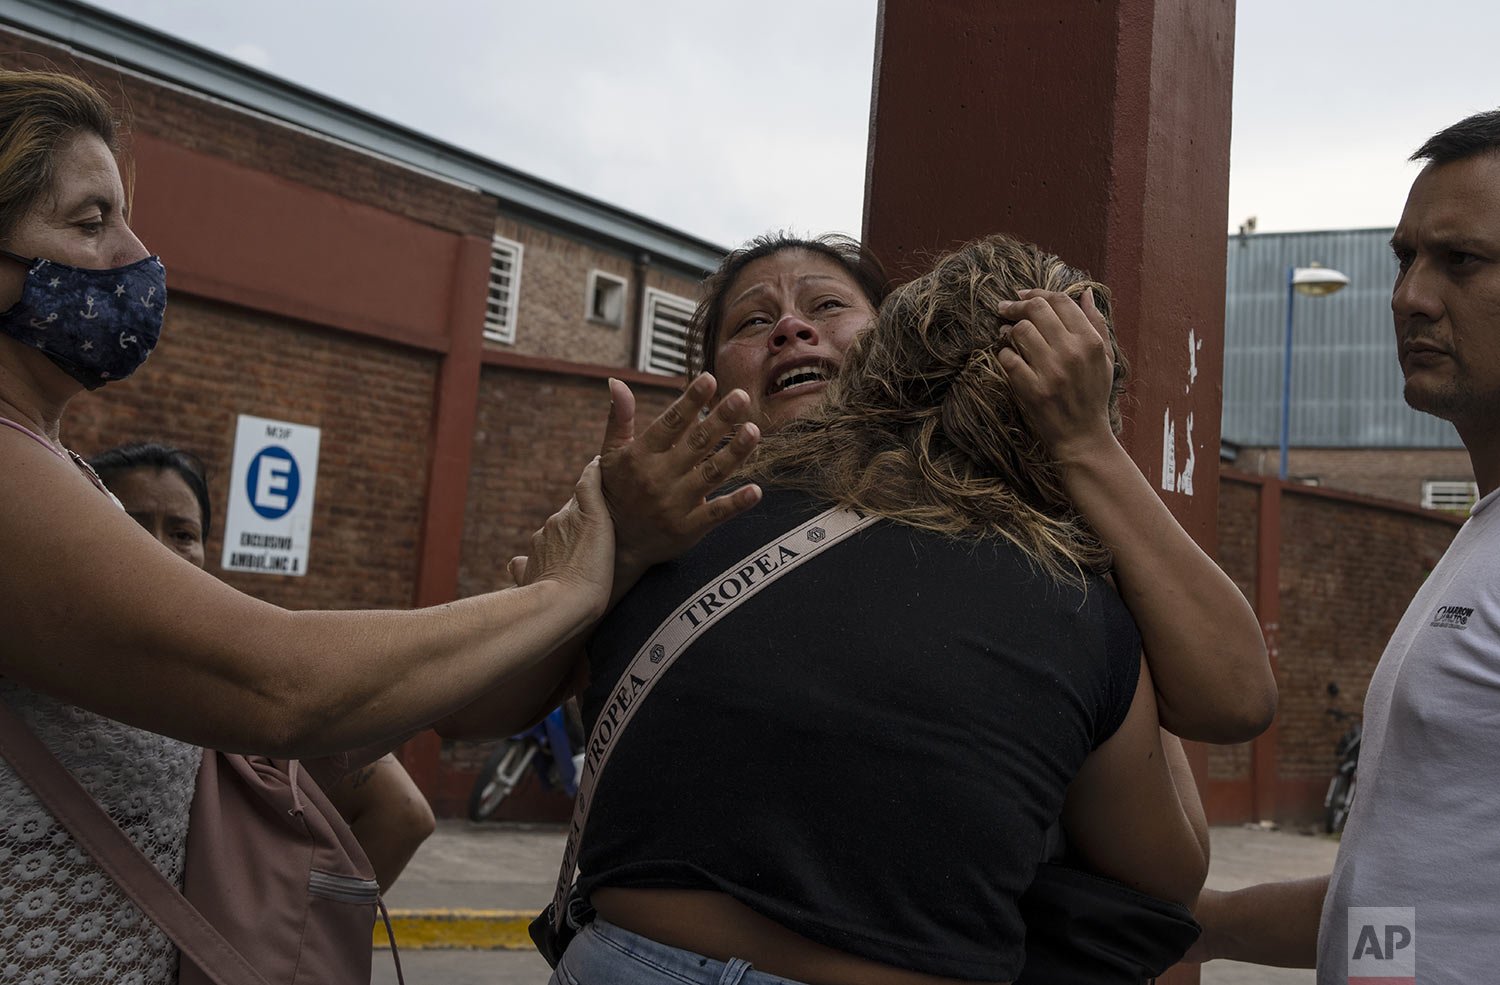  A woman grieves after learning her brother died from consuming toxic cocaine outside the Bocalandro Hospital  in Buenos Aires, Argentina, Feb. 4, 2022. A batch of cocaine that appears to have been laced with a synthetic opioid killed 24 people and h